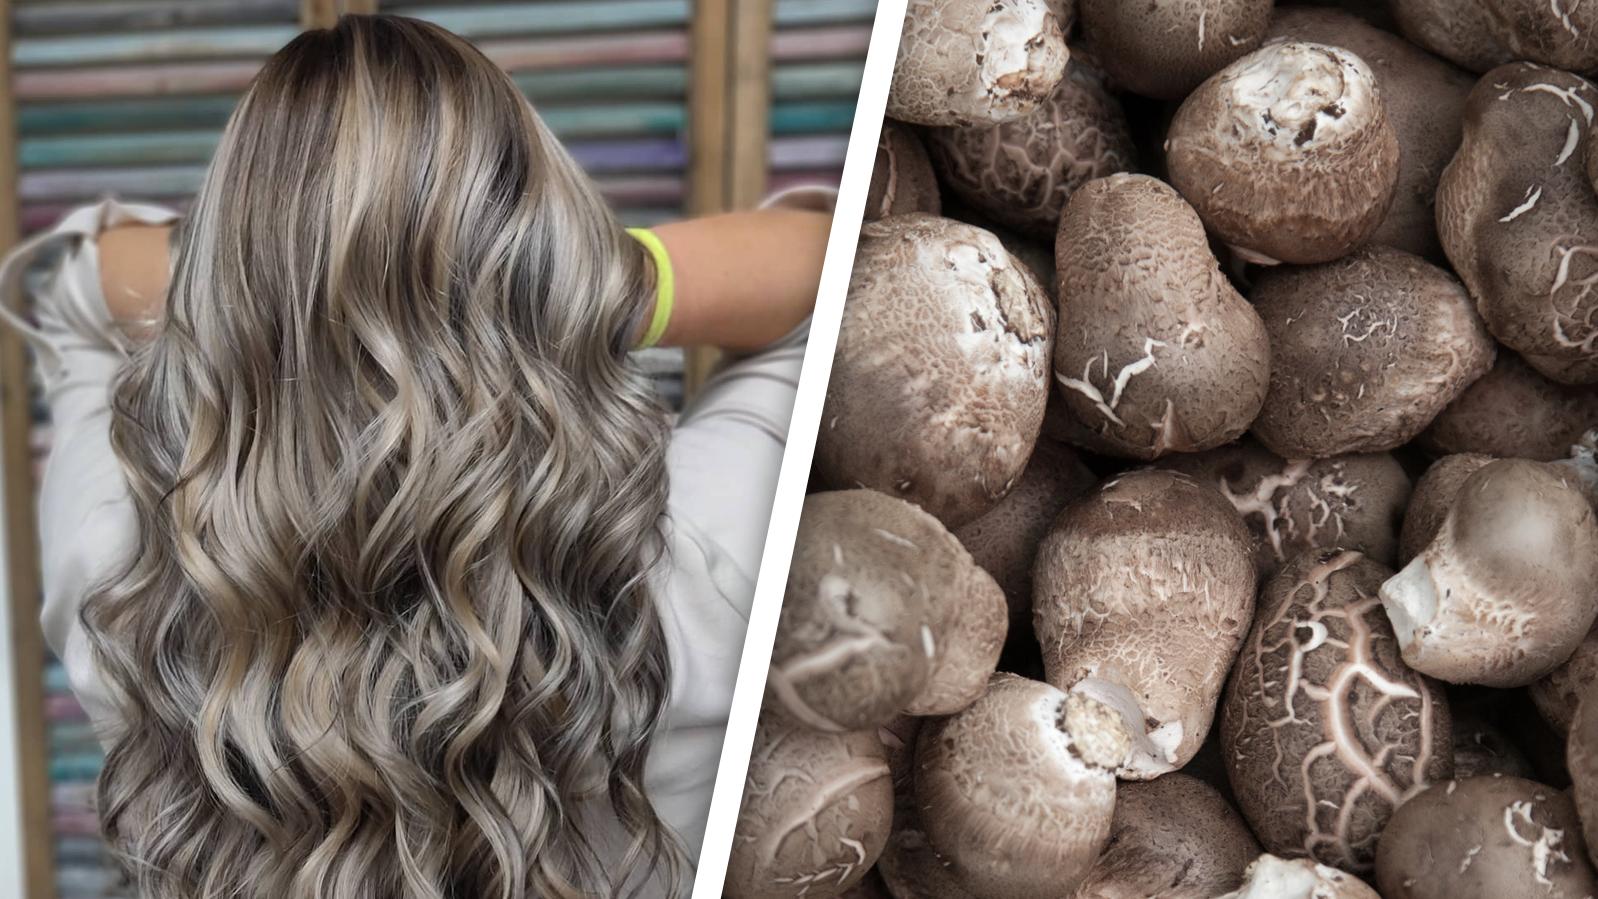 2. Mushroom Blonde Hair: The Hottest Trend of the Season - wide 4